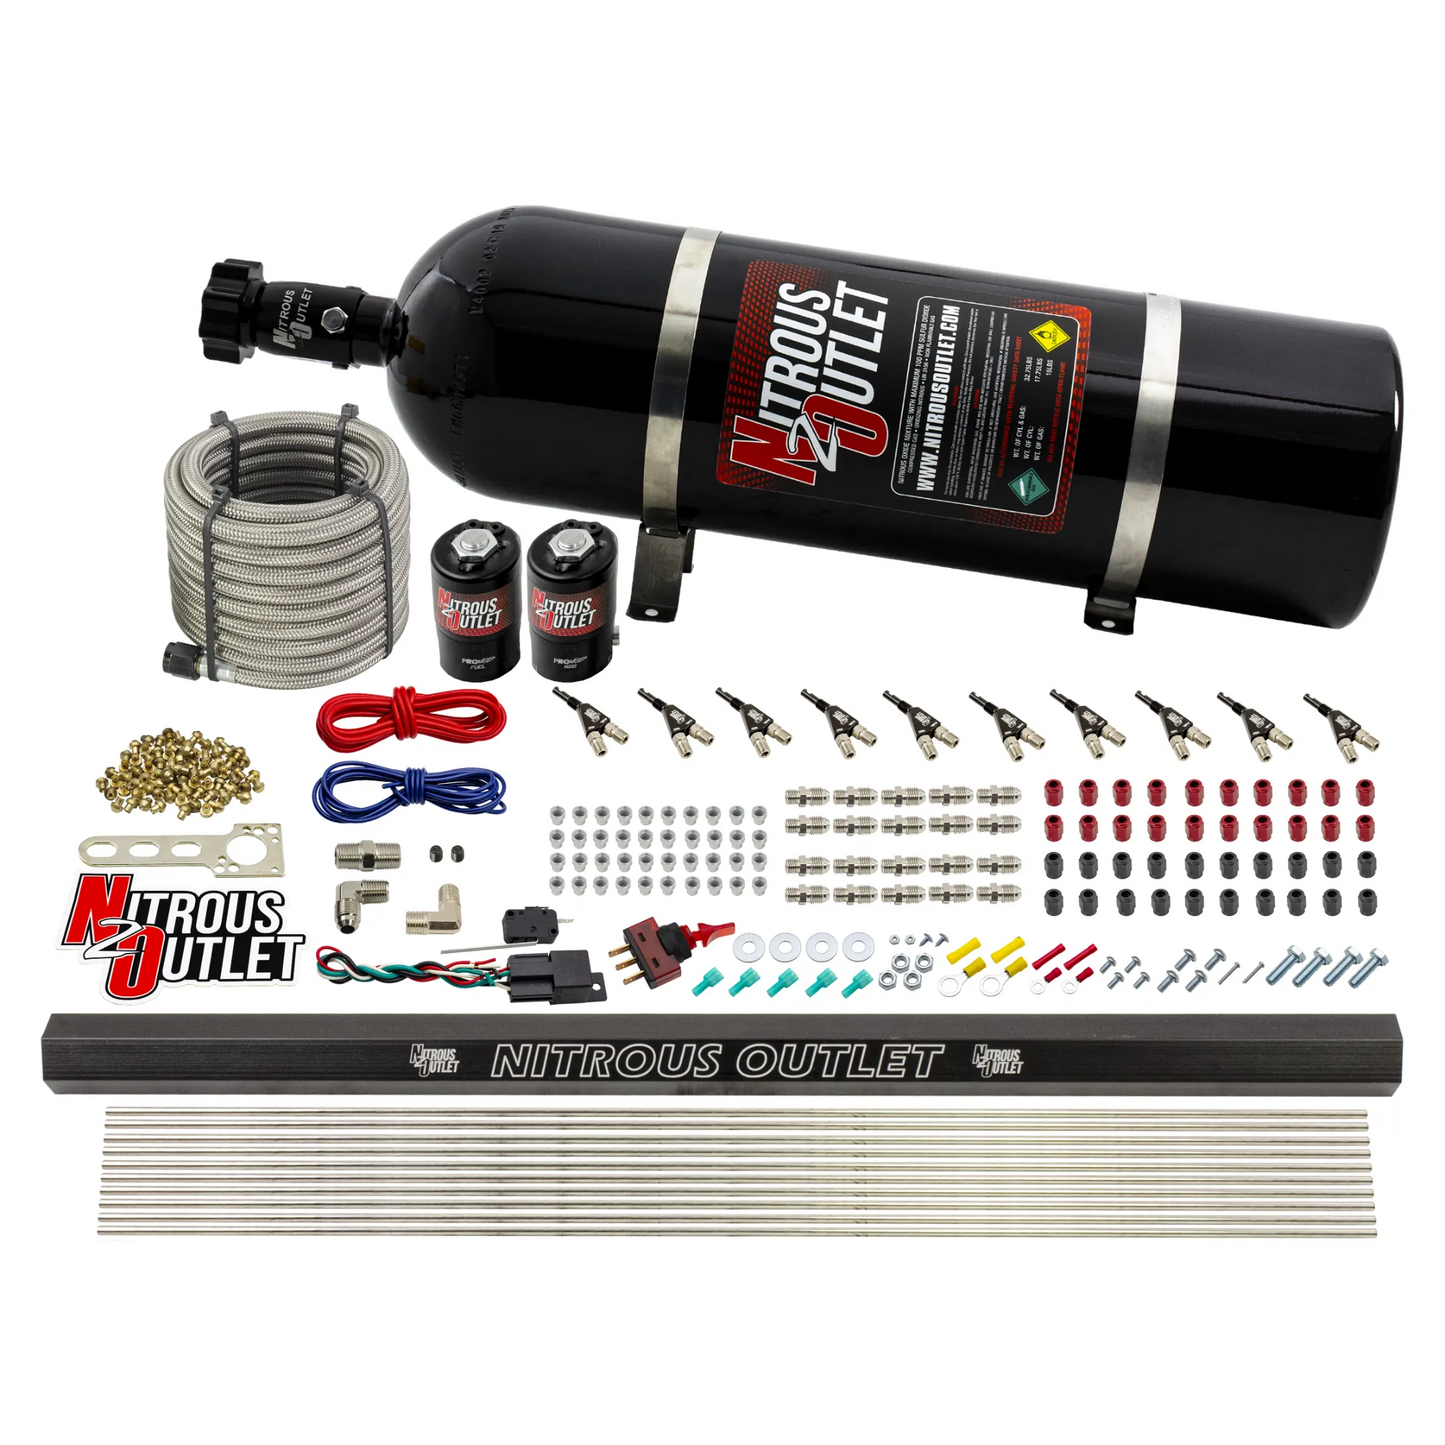 10 Cylinder Wet Direct Port System With Single Injection Rail - Gas (45-55 PSI)  - .122" Nitrous/.310" Fuel - 90° Aluminum Nozzles